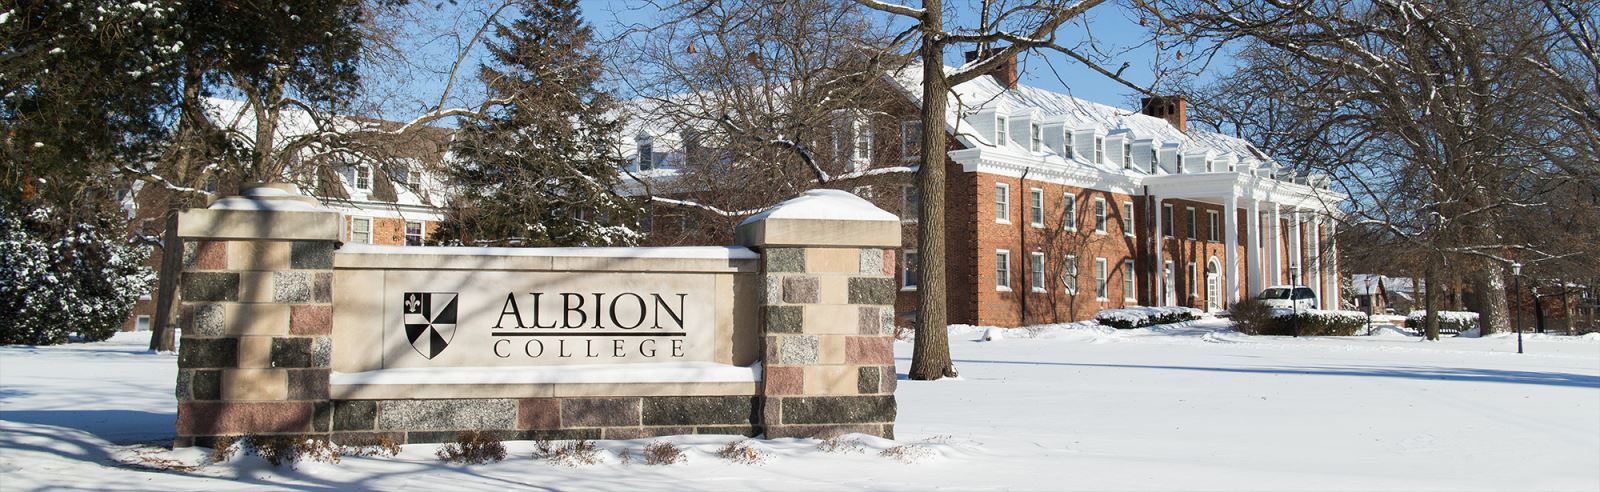 online time clock albion college